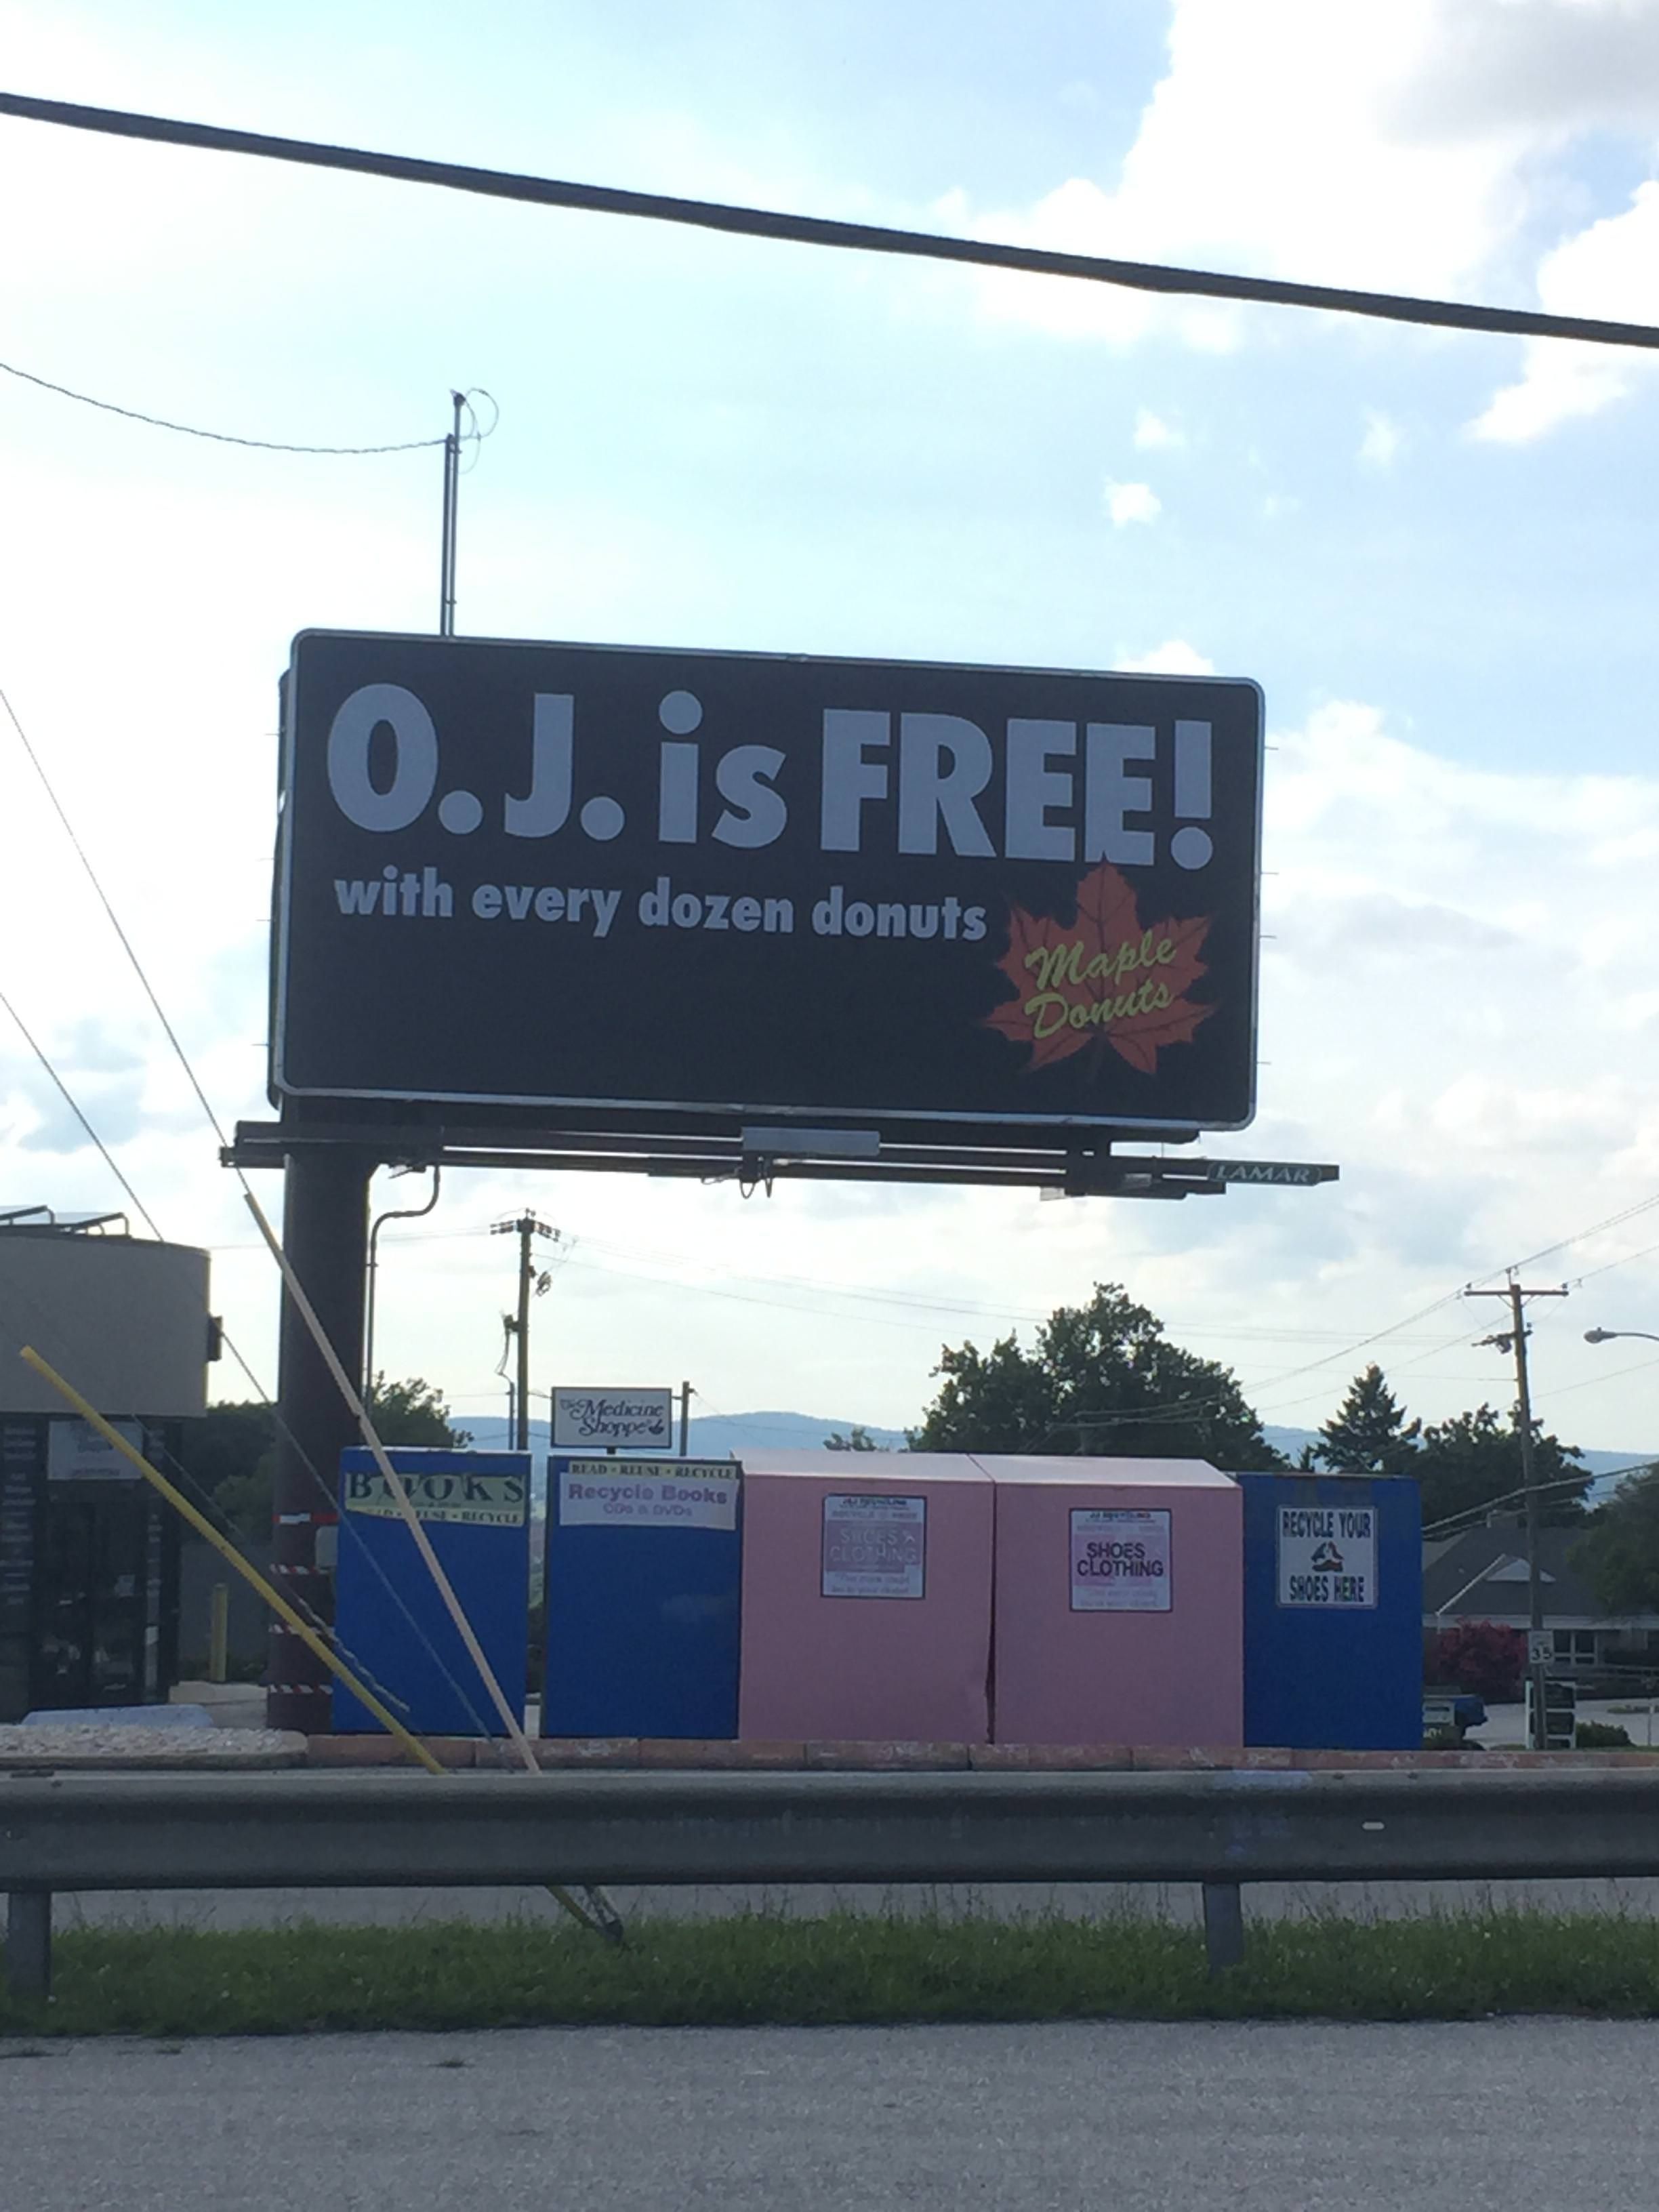 The most recent billboard AD from my local donut shop